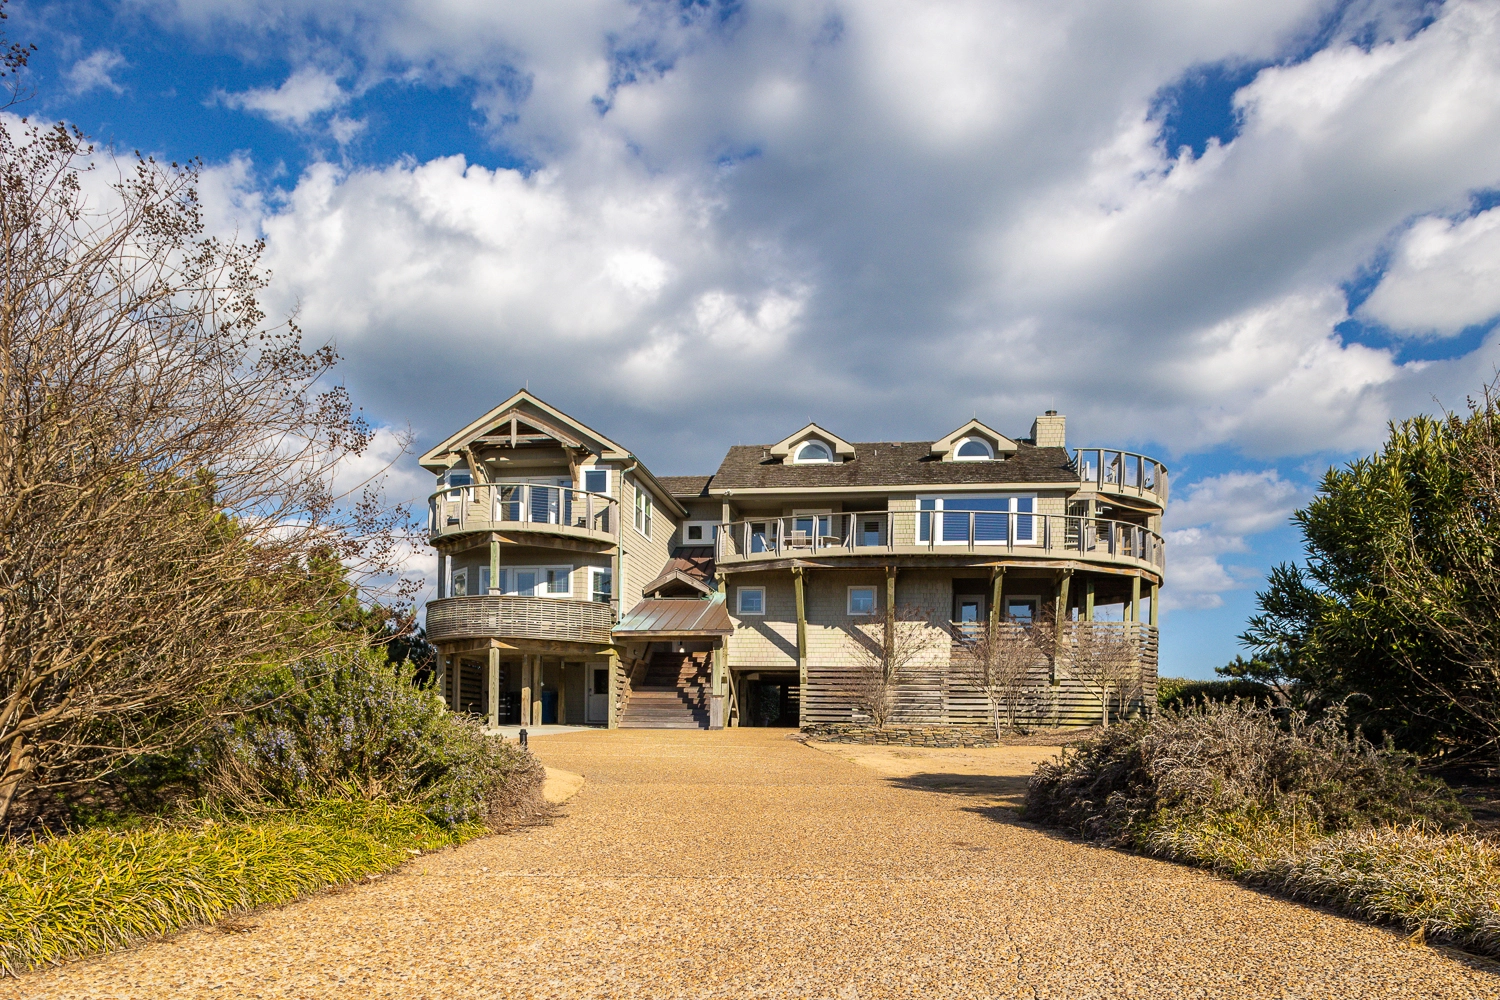 718 ROYAL PALM PARADISE II  OBX Vacation Rentals in Duck, NC